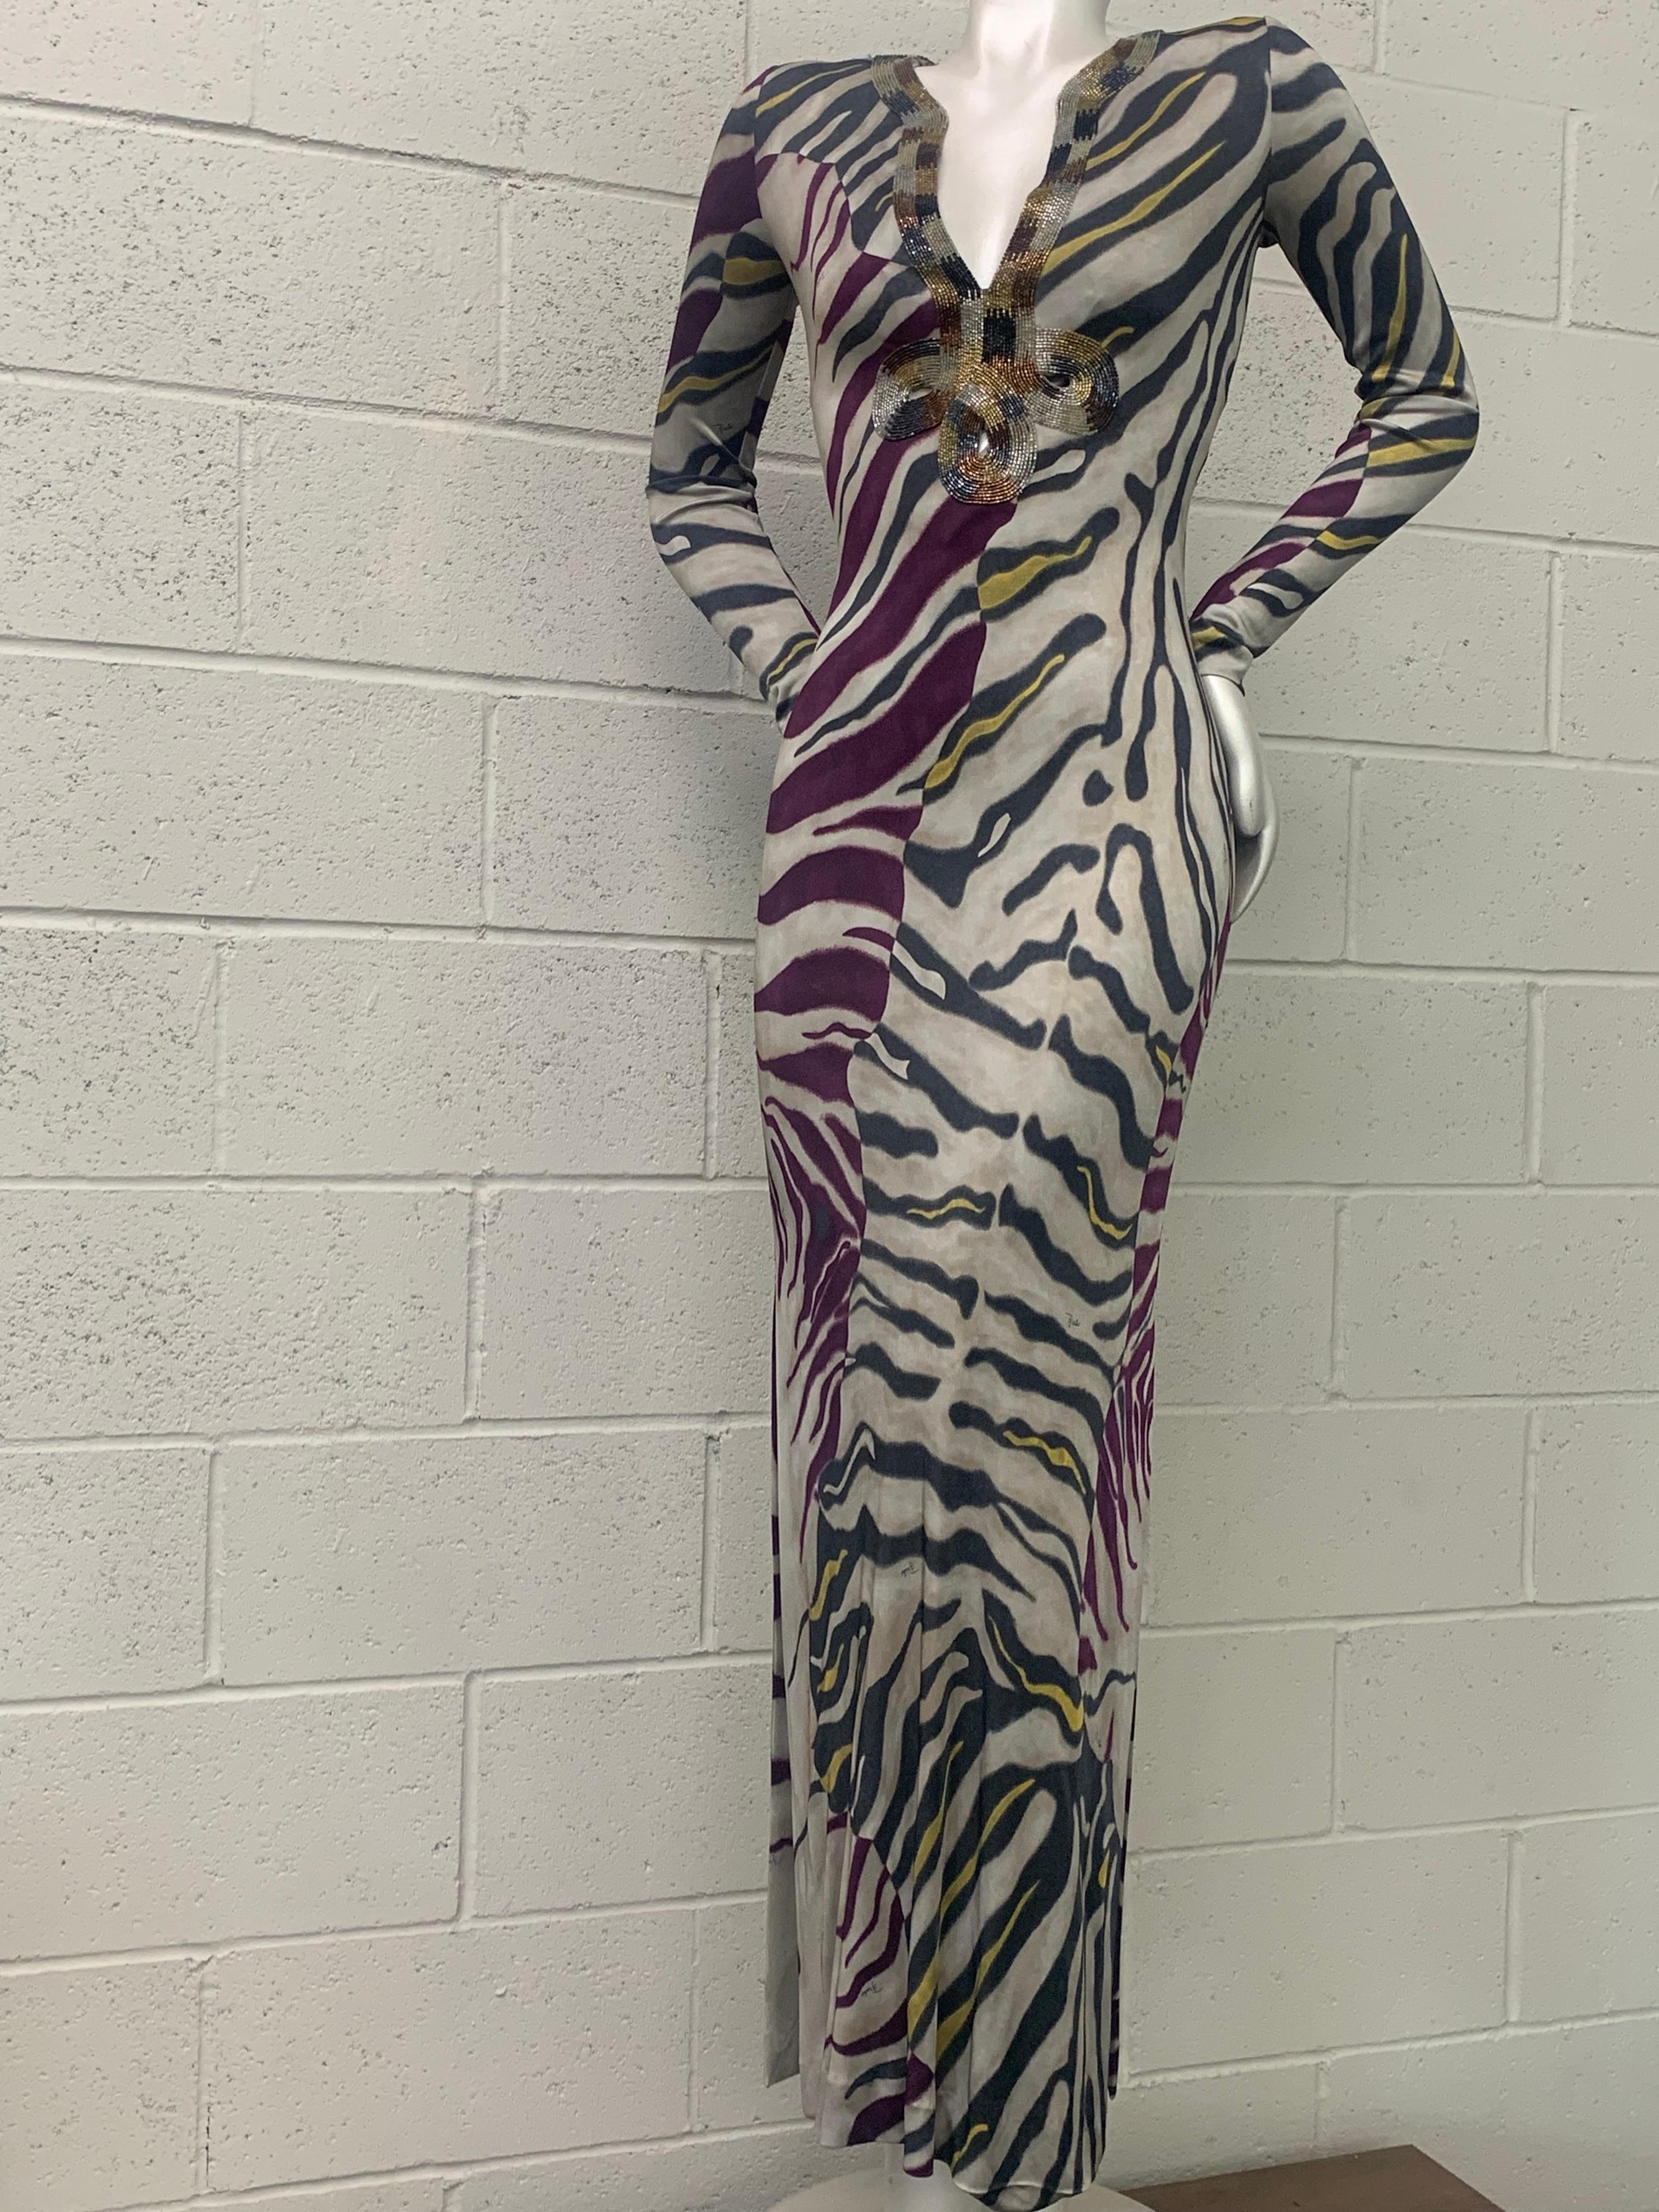 Black Emilio Pucci Stylized Zebra-Print Body-Conscious Beaded Maxi Dress in Rayon Knit For Sale